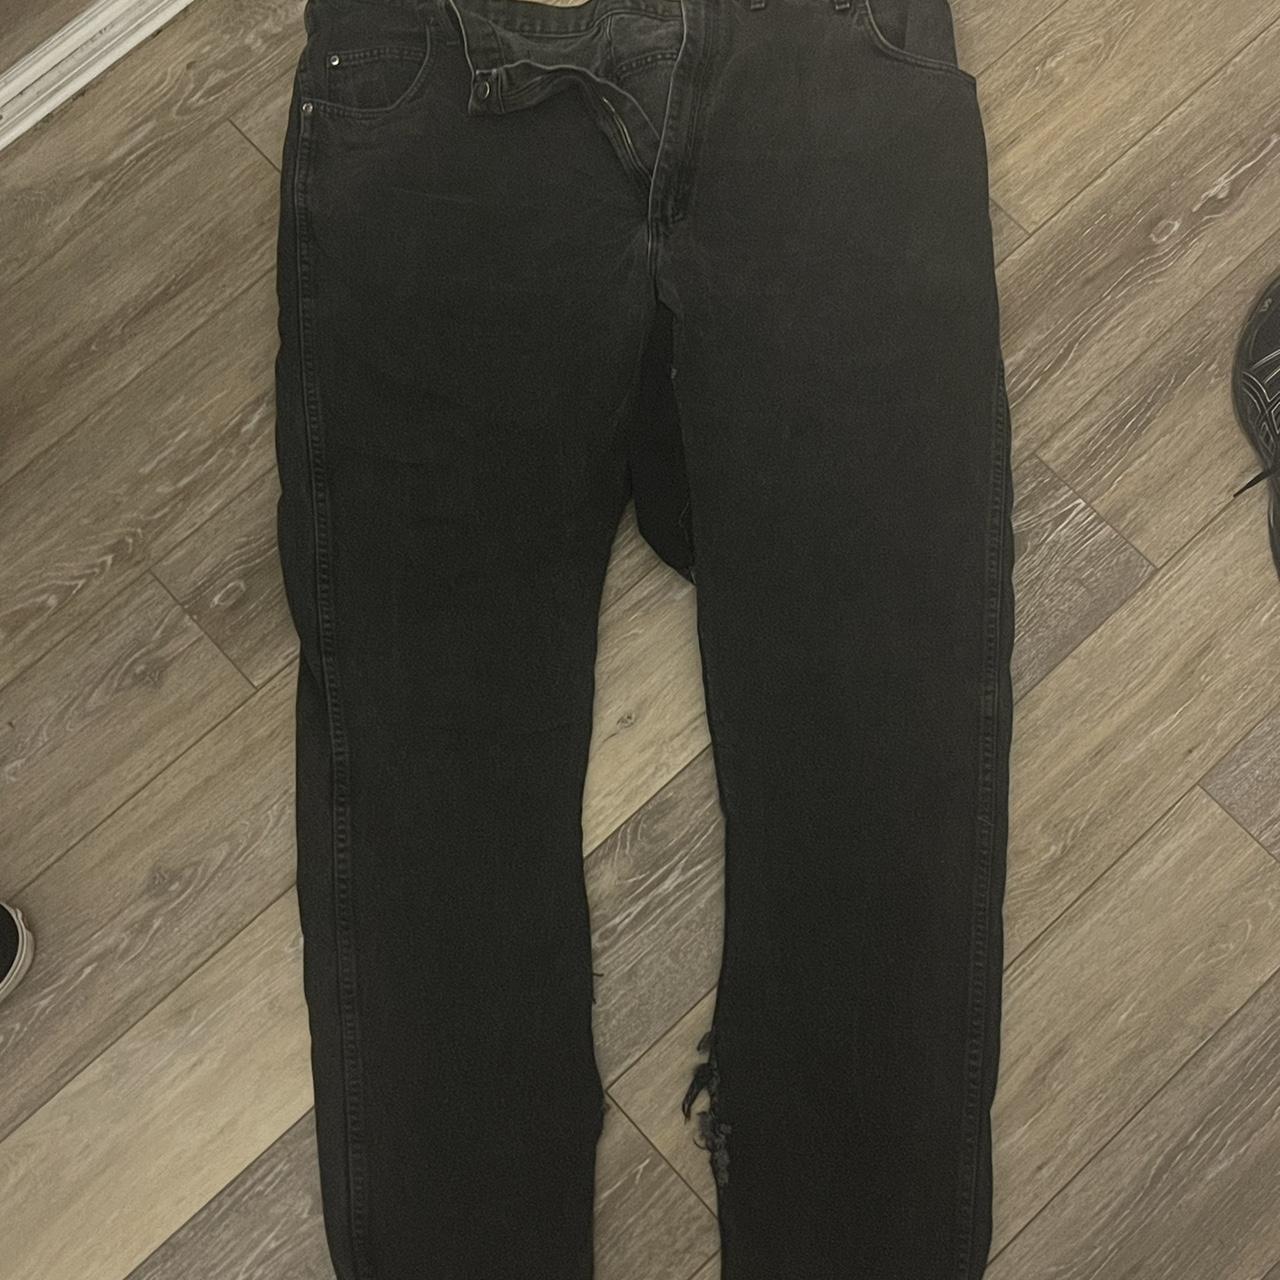 Wrangler jeans size shown in pictures Long inseam... - Depop